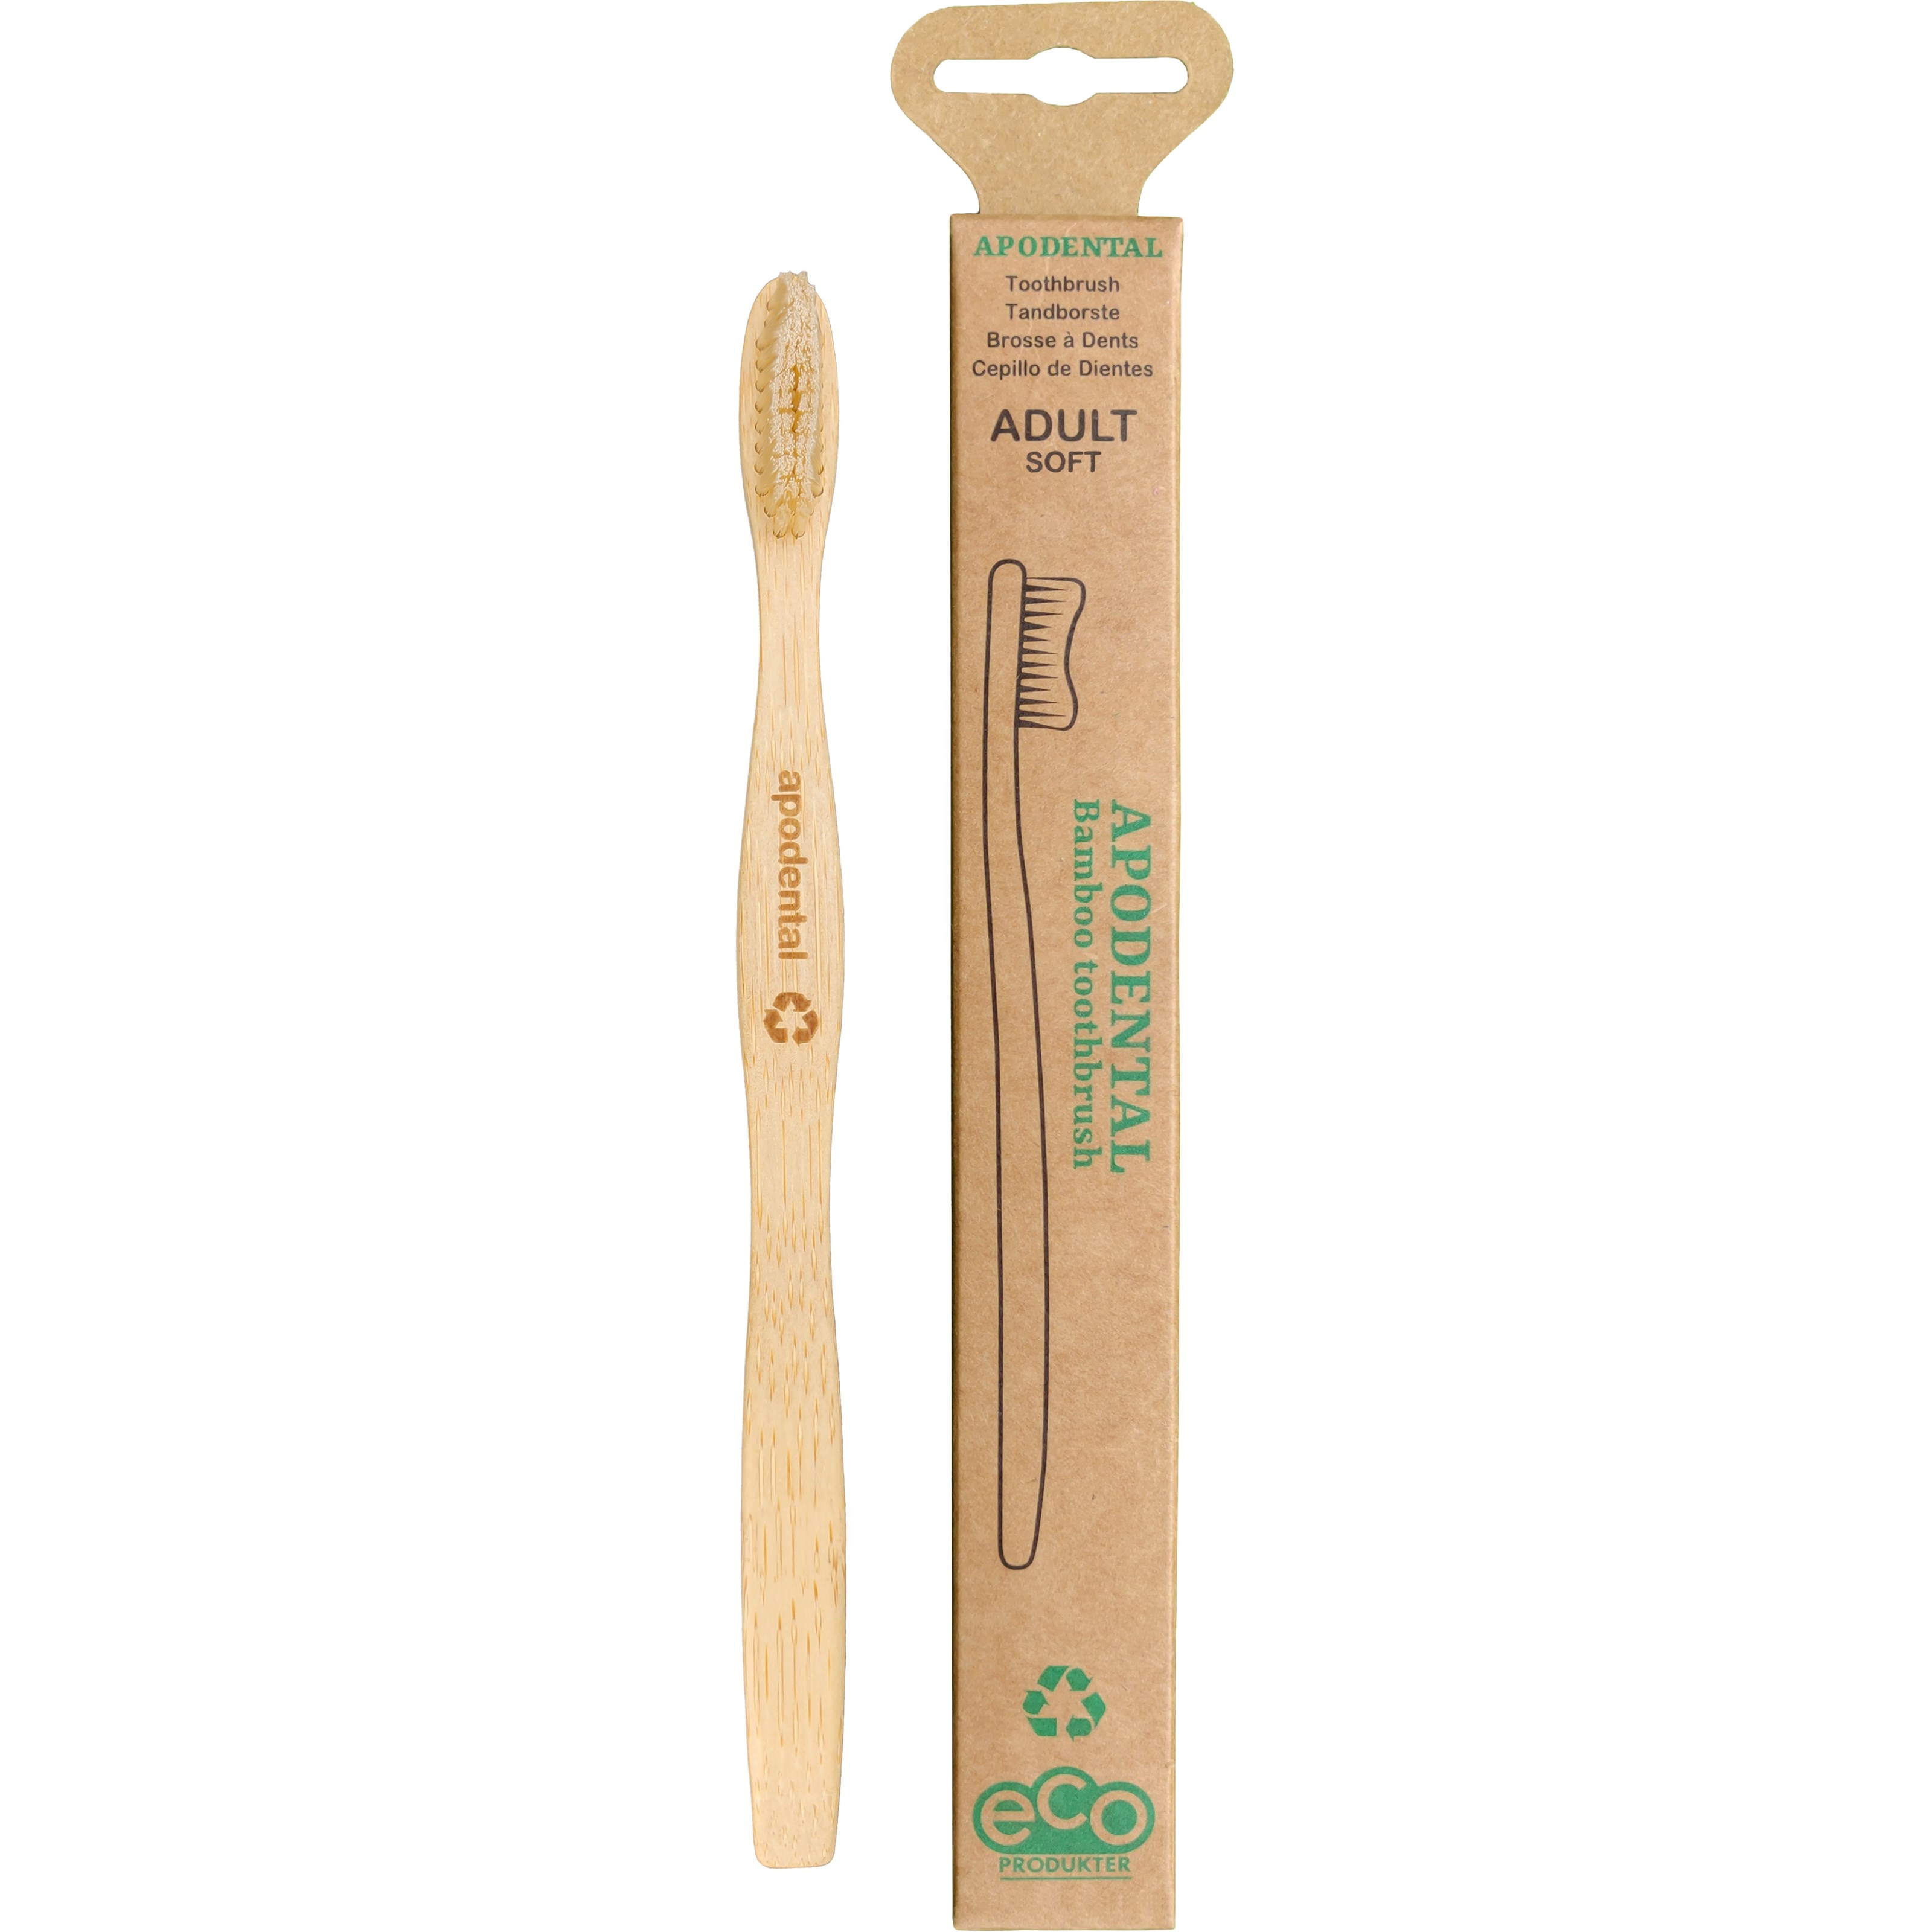 Apodental Bamboo Toothbrush Adult Soft